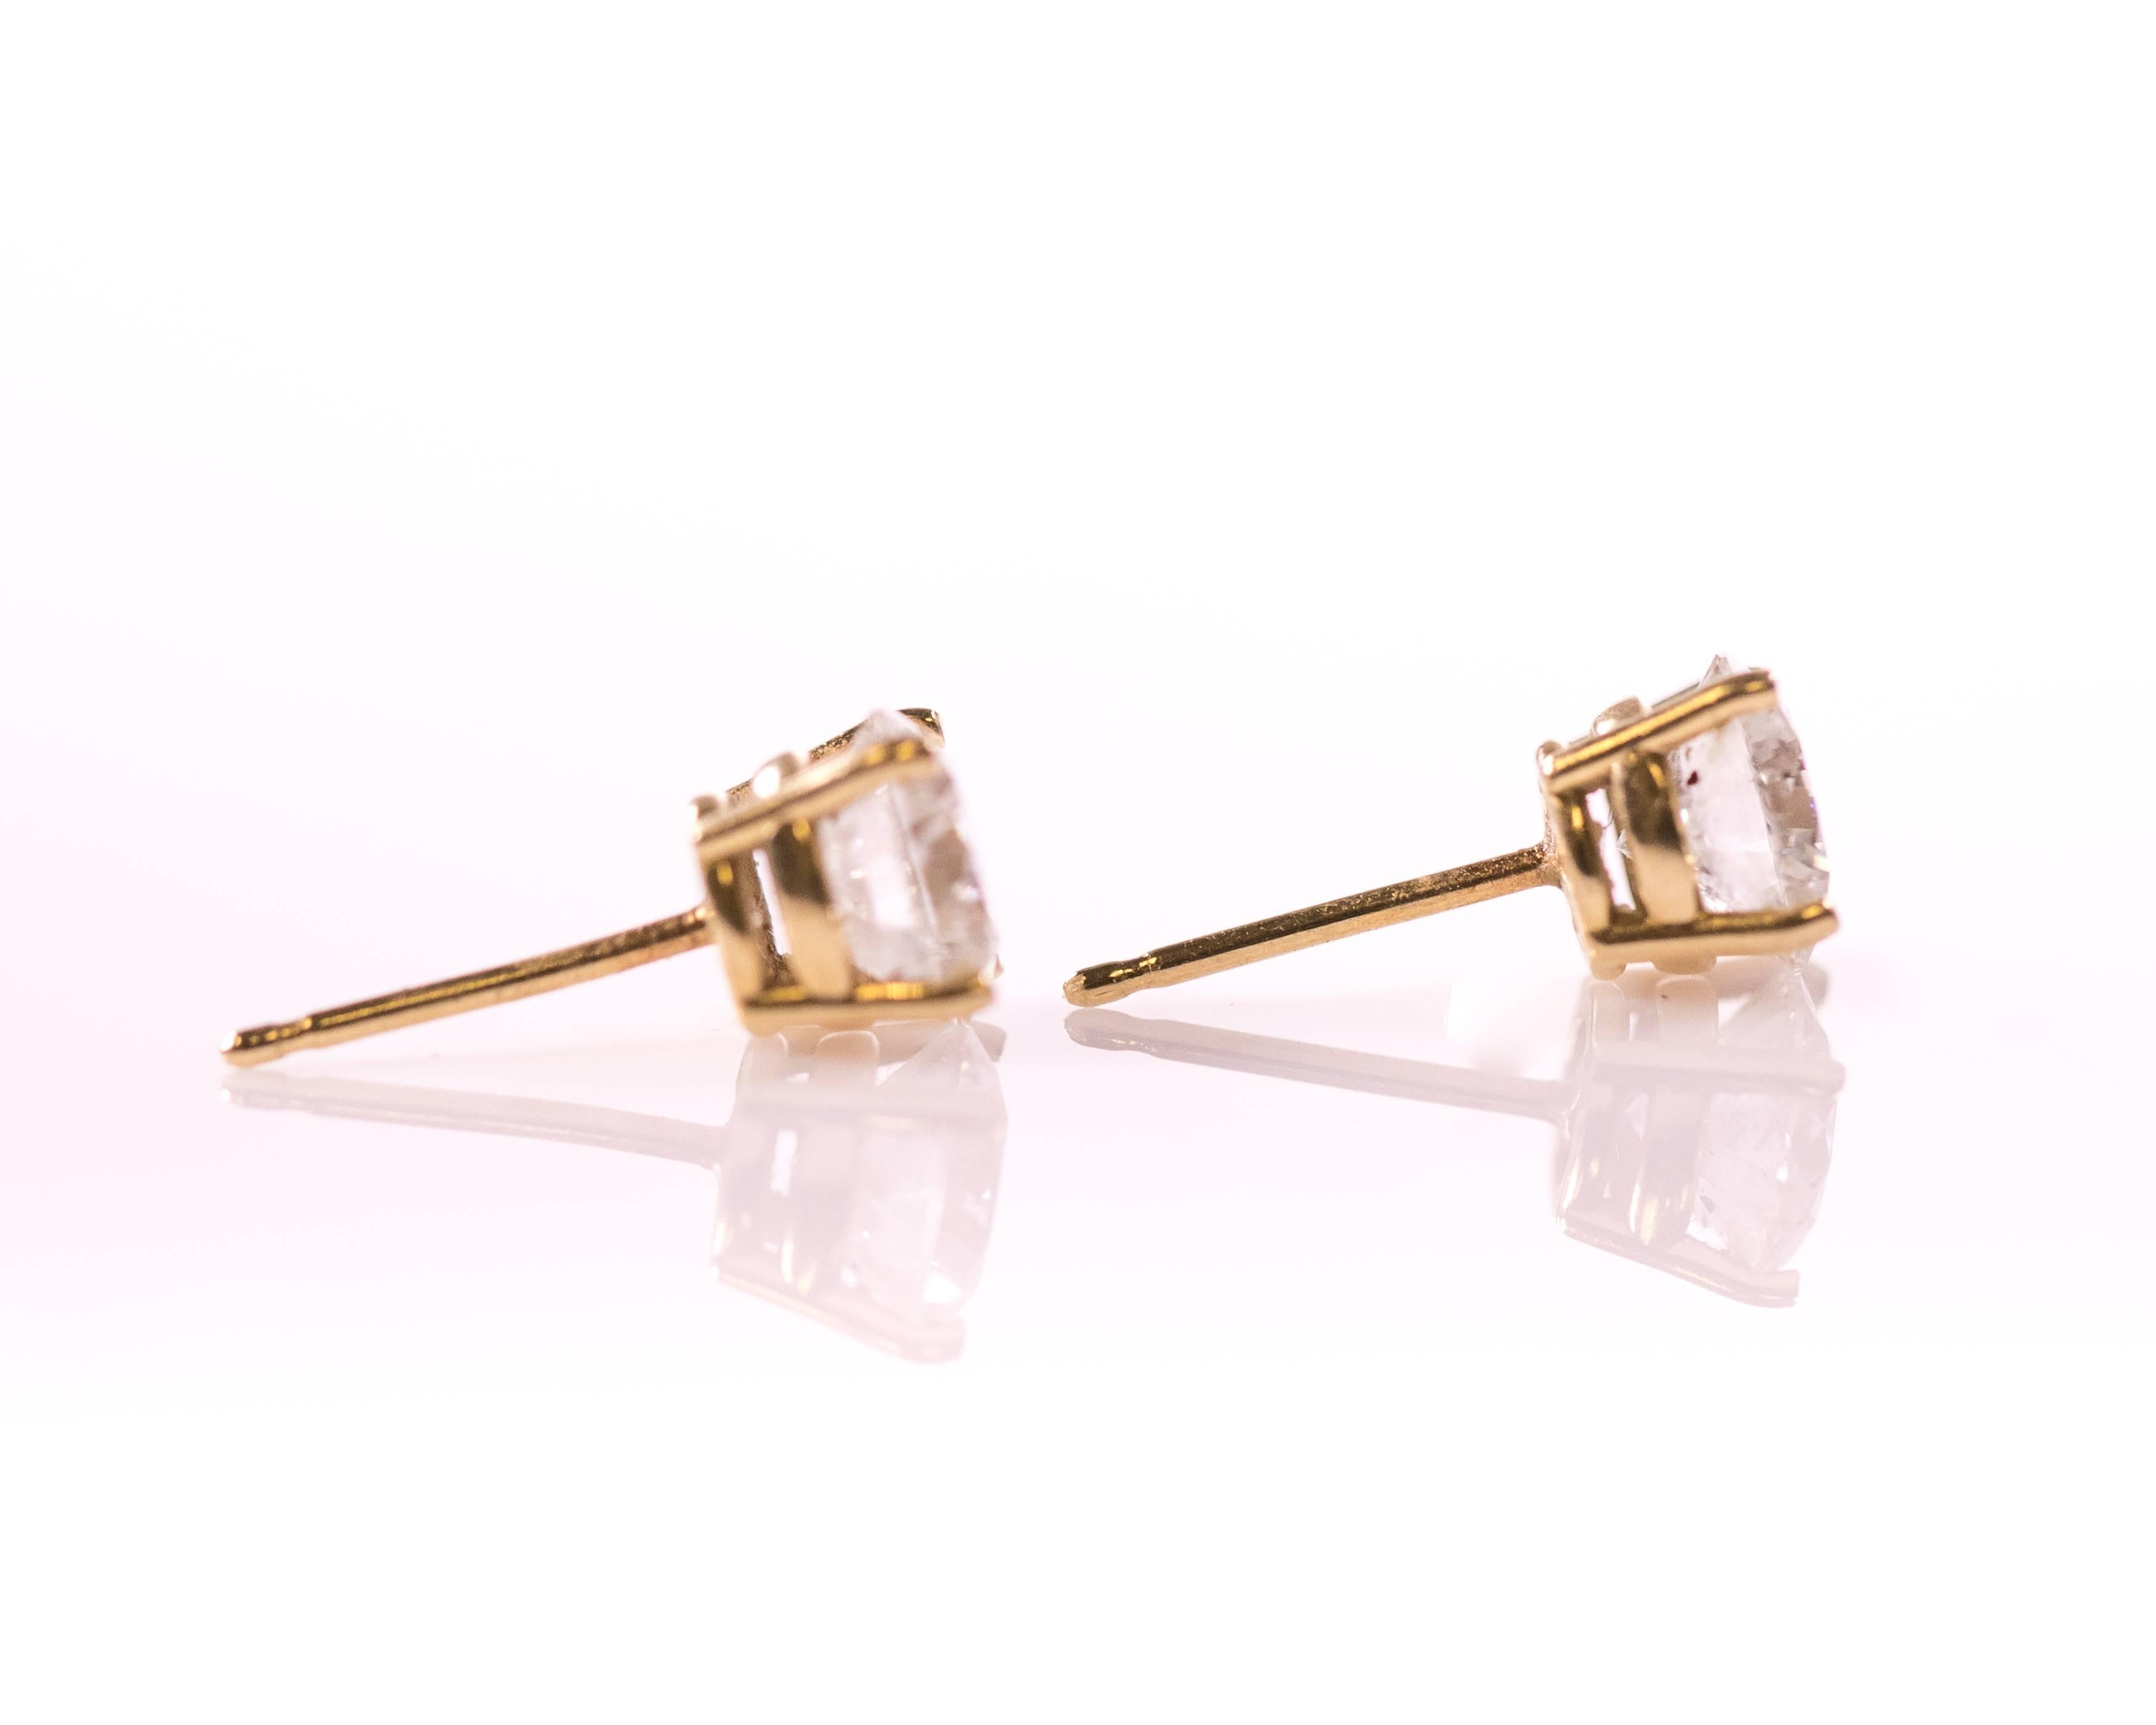 These gorgeous 2017 (made in-house) Diamond Stud Earrings sparkle and shine! Each 6 millimeter, excellent cut diamond is set in 14 Karat Yellow Gold and held in place by 4 prongs. These post earrings have push backs. Classic, dazzling and perfect